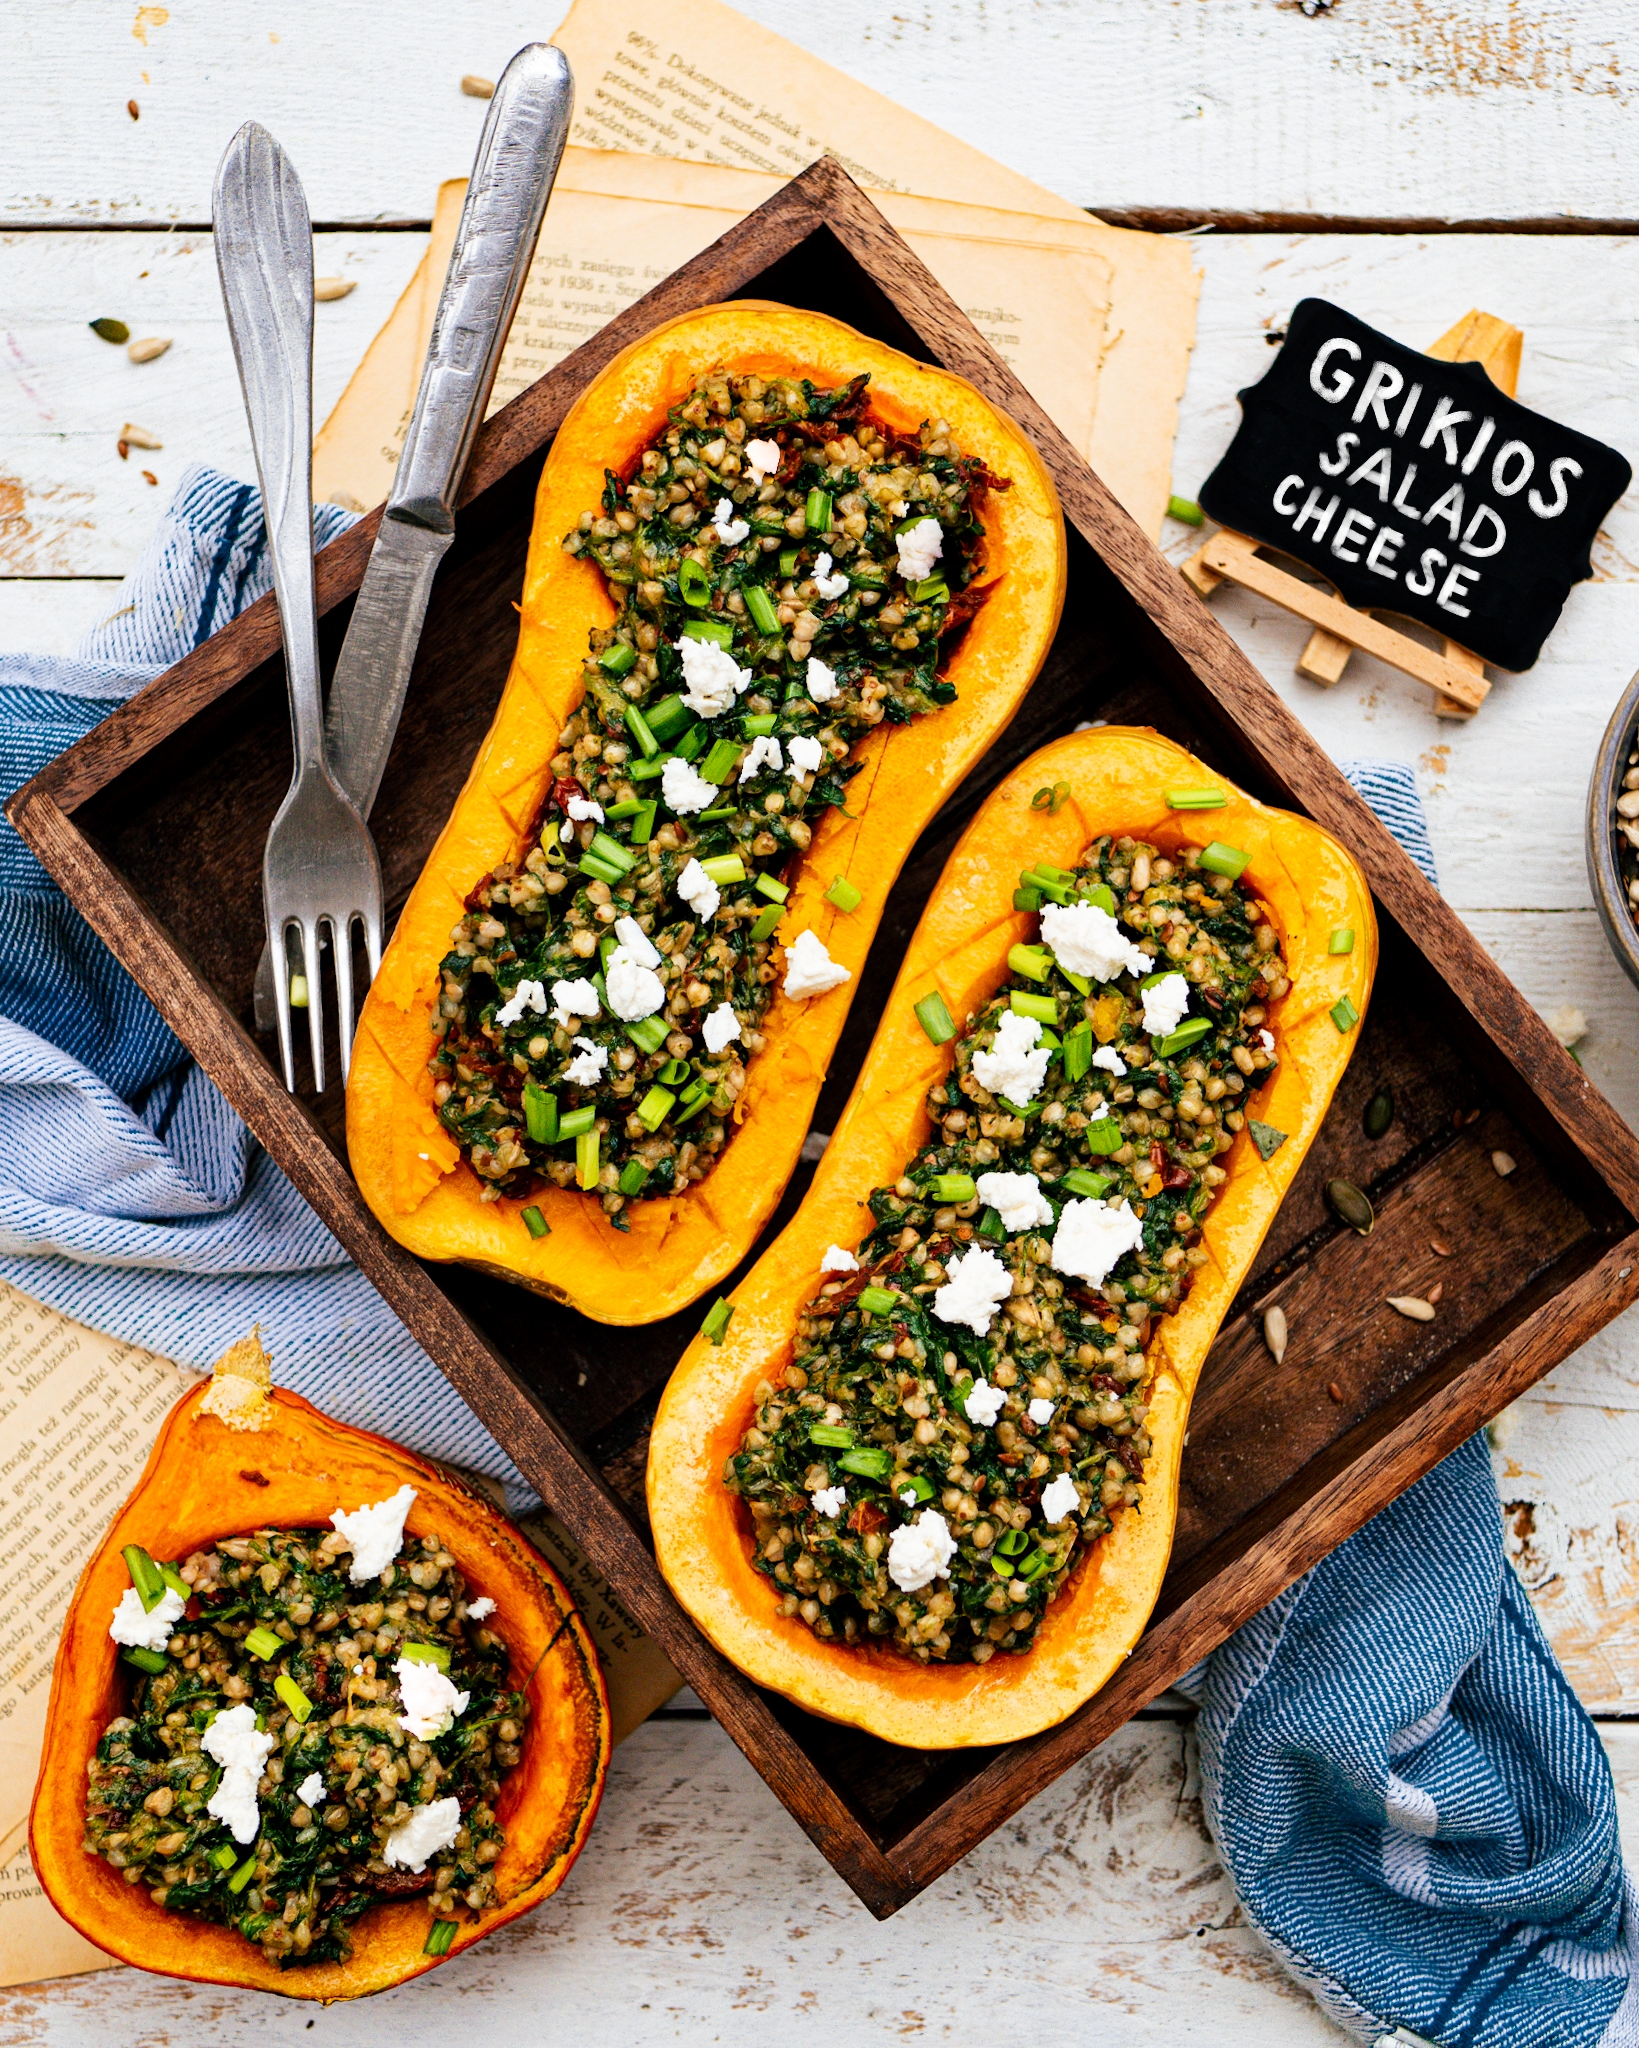 Roasted pumpkin stuffed with white buckwheat with spinach and sun-dried tomatoes, sprinkled abundantly with chives and Grikios feta-type cheese